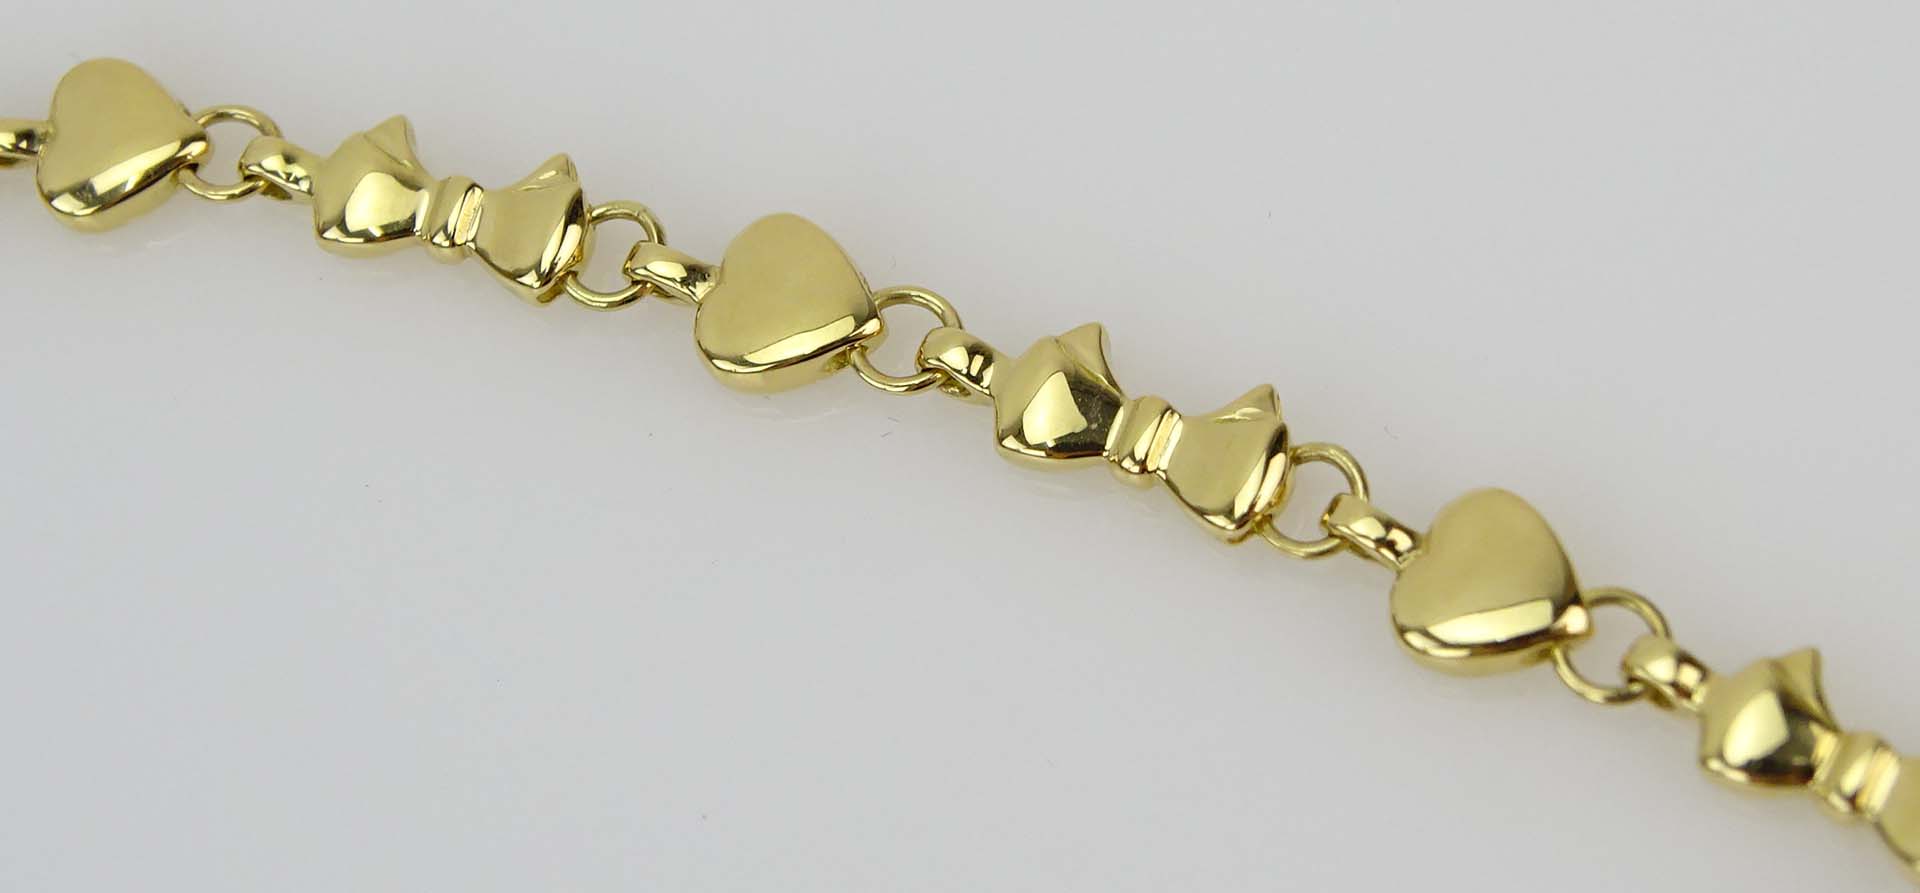 Tiffany & Co 18 Karat Yellow Gold Hearts and Bow Tie Necklace.